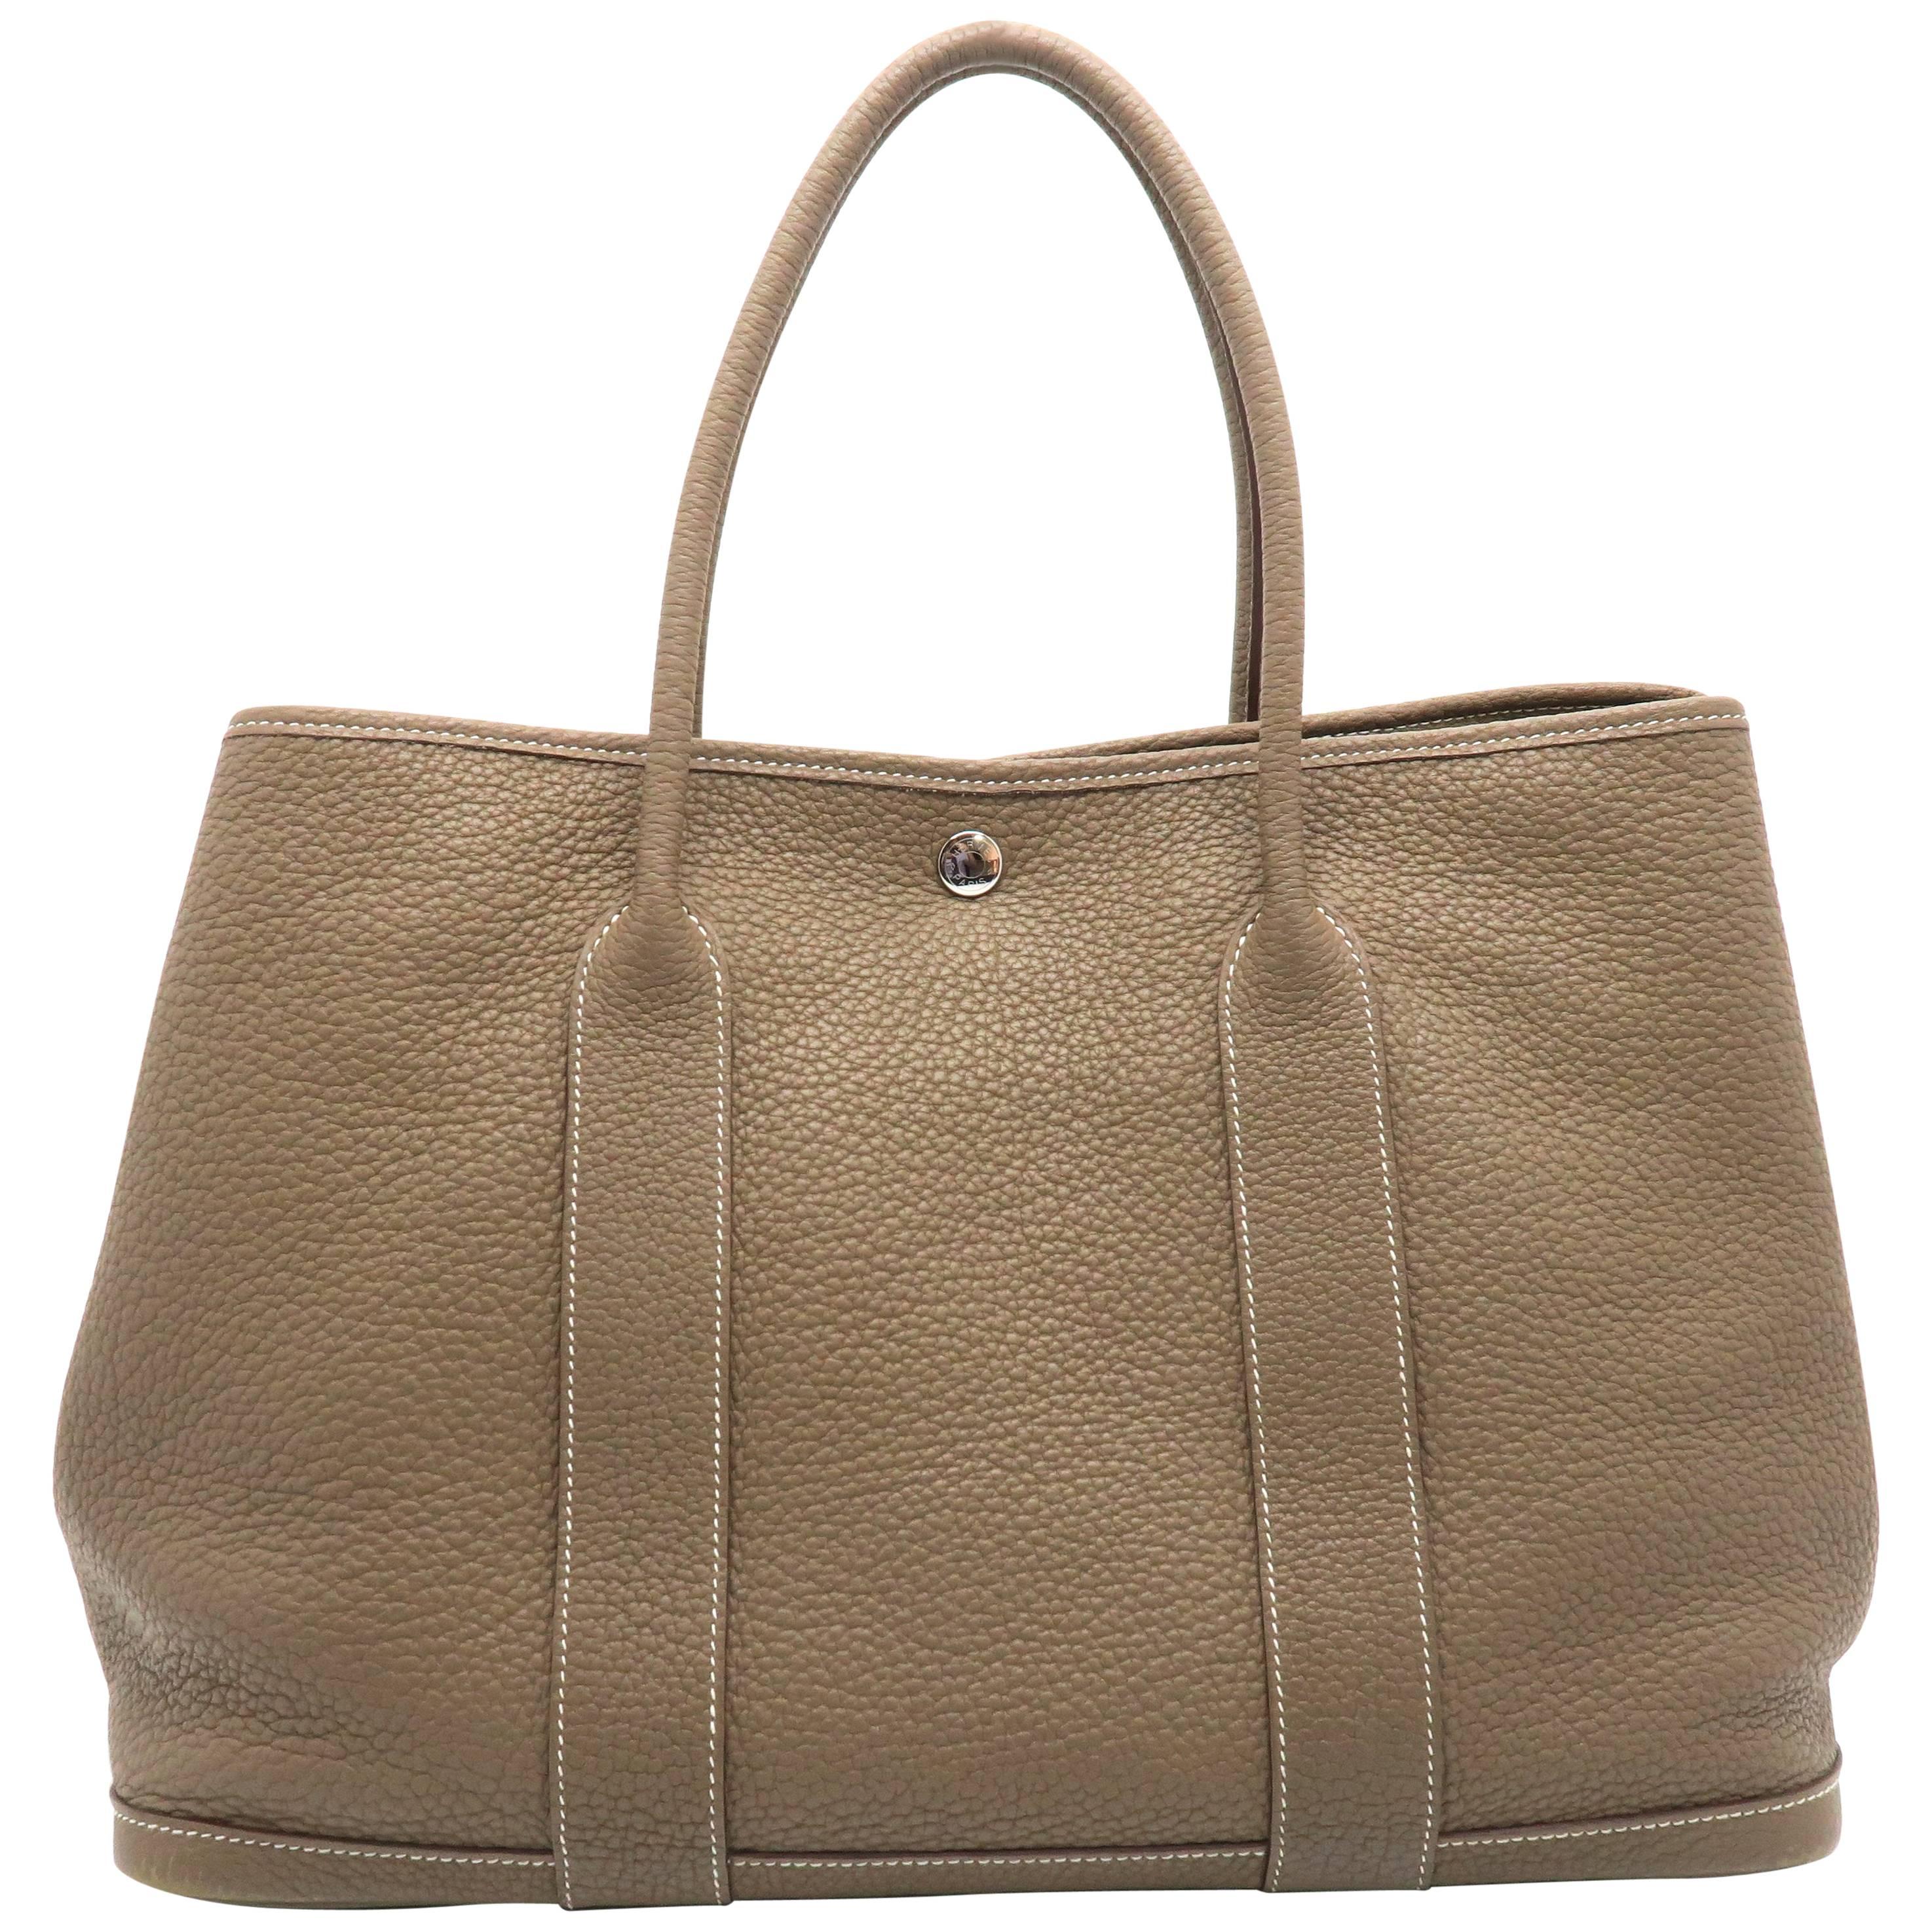 Hermes Garden Party PM Etoupe Taurillon Clemence Leather Tote Bag For Sale